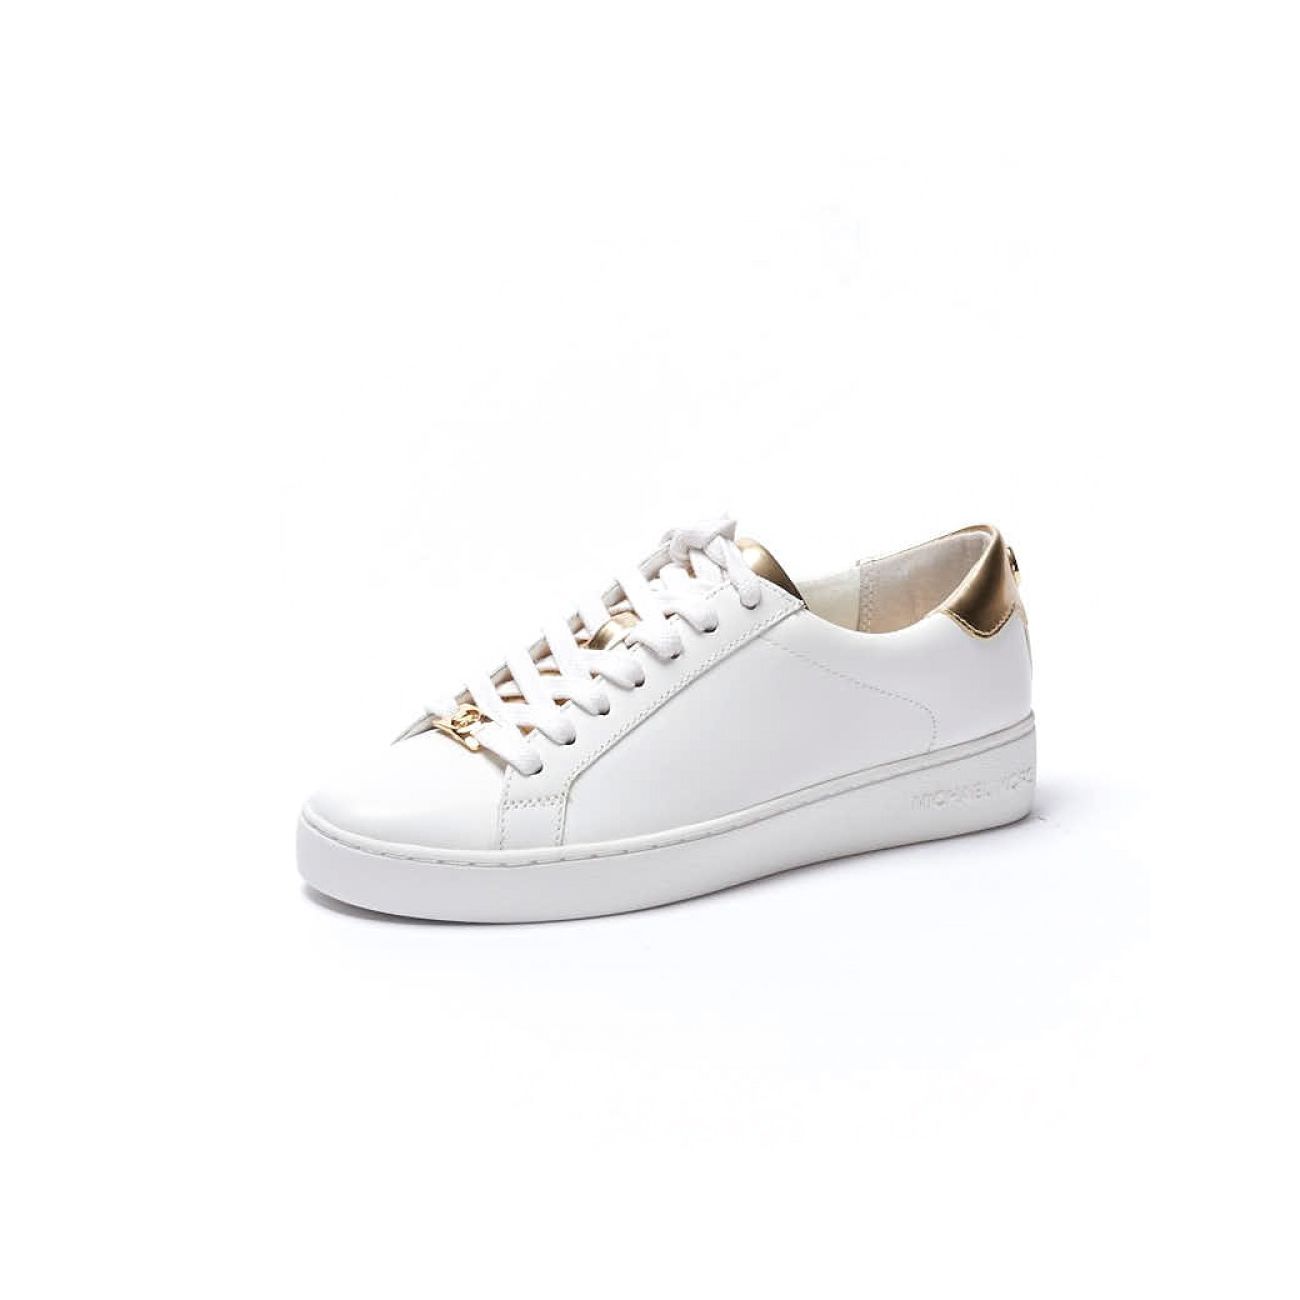 MICHAEL KORS LEATHER LOW SNEAKER IRVING Woman Optic White Pale Gold